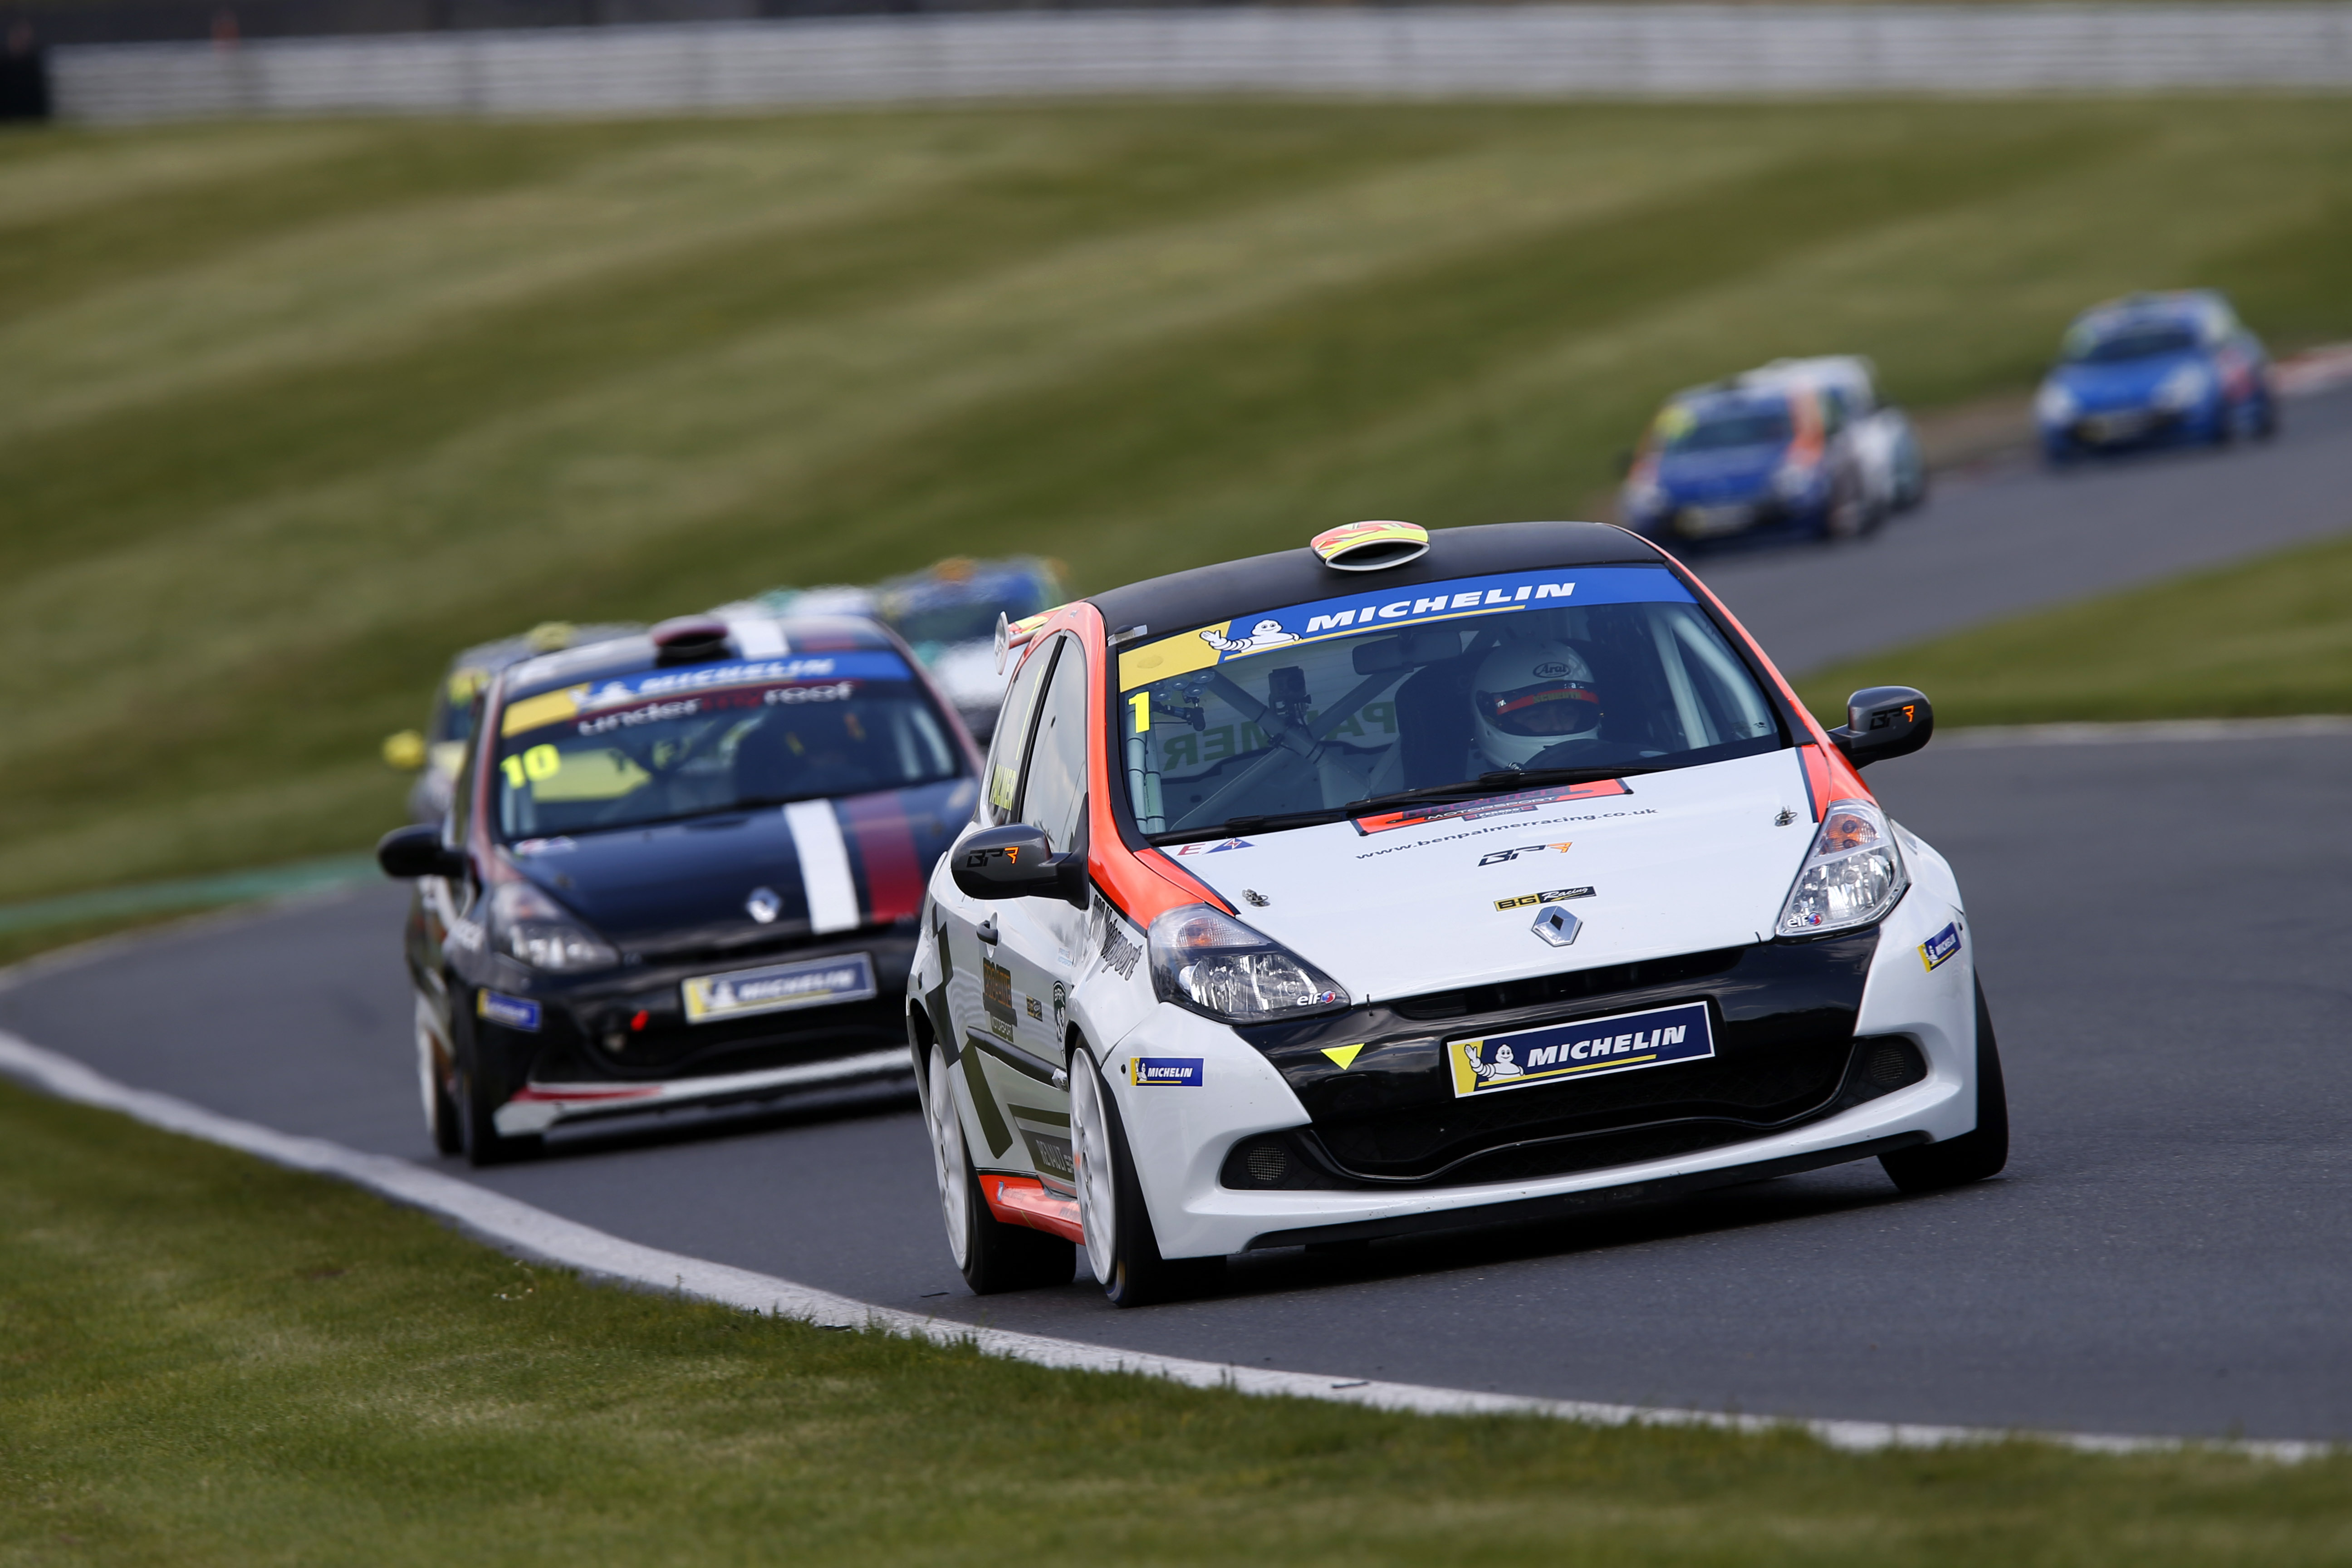 MICHELIN CLIO CUP SERIES PROVIDES ANOTHER WEEKEND OF EXCELLENT RACING - Click here to view this news entry